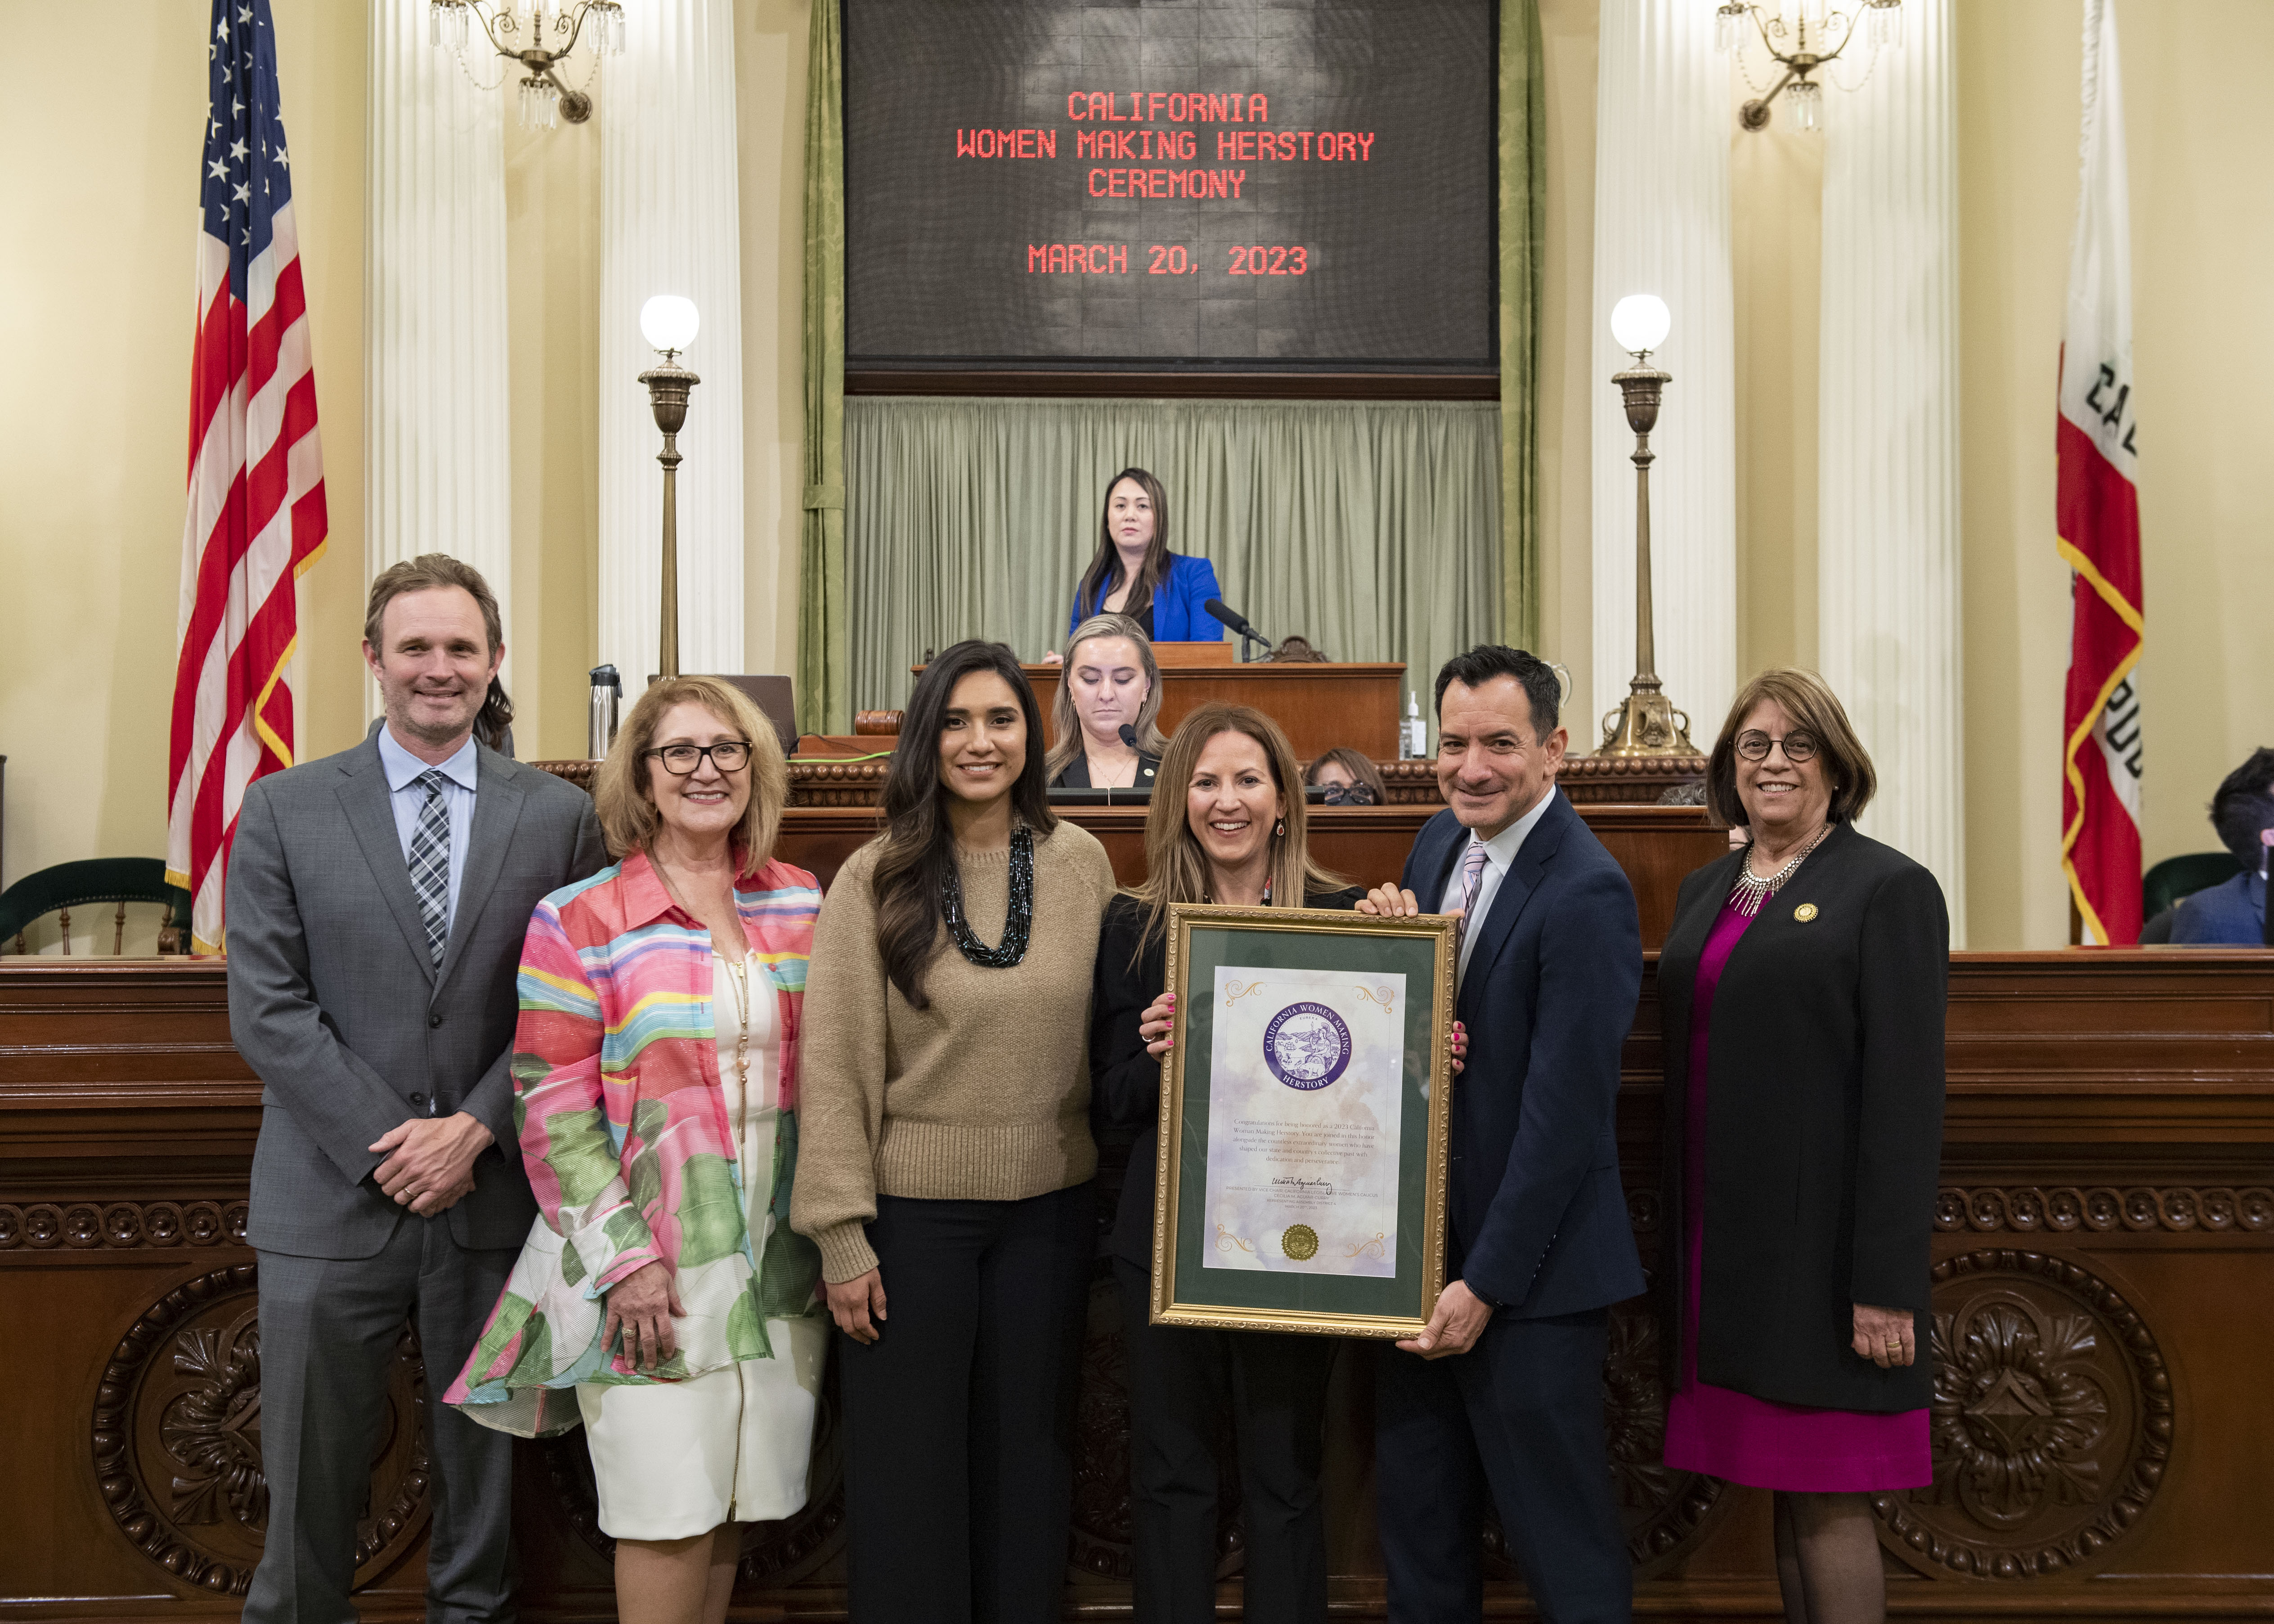 Assemblymember Sabrina Cervantes and 2023 58th Assembly District Woman of the Year, Priscilla Grijalva